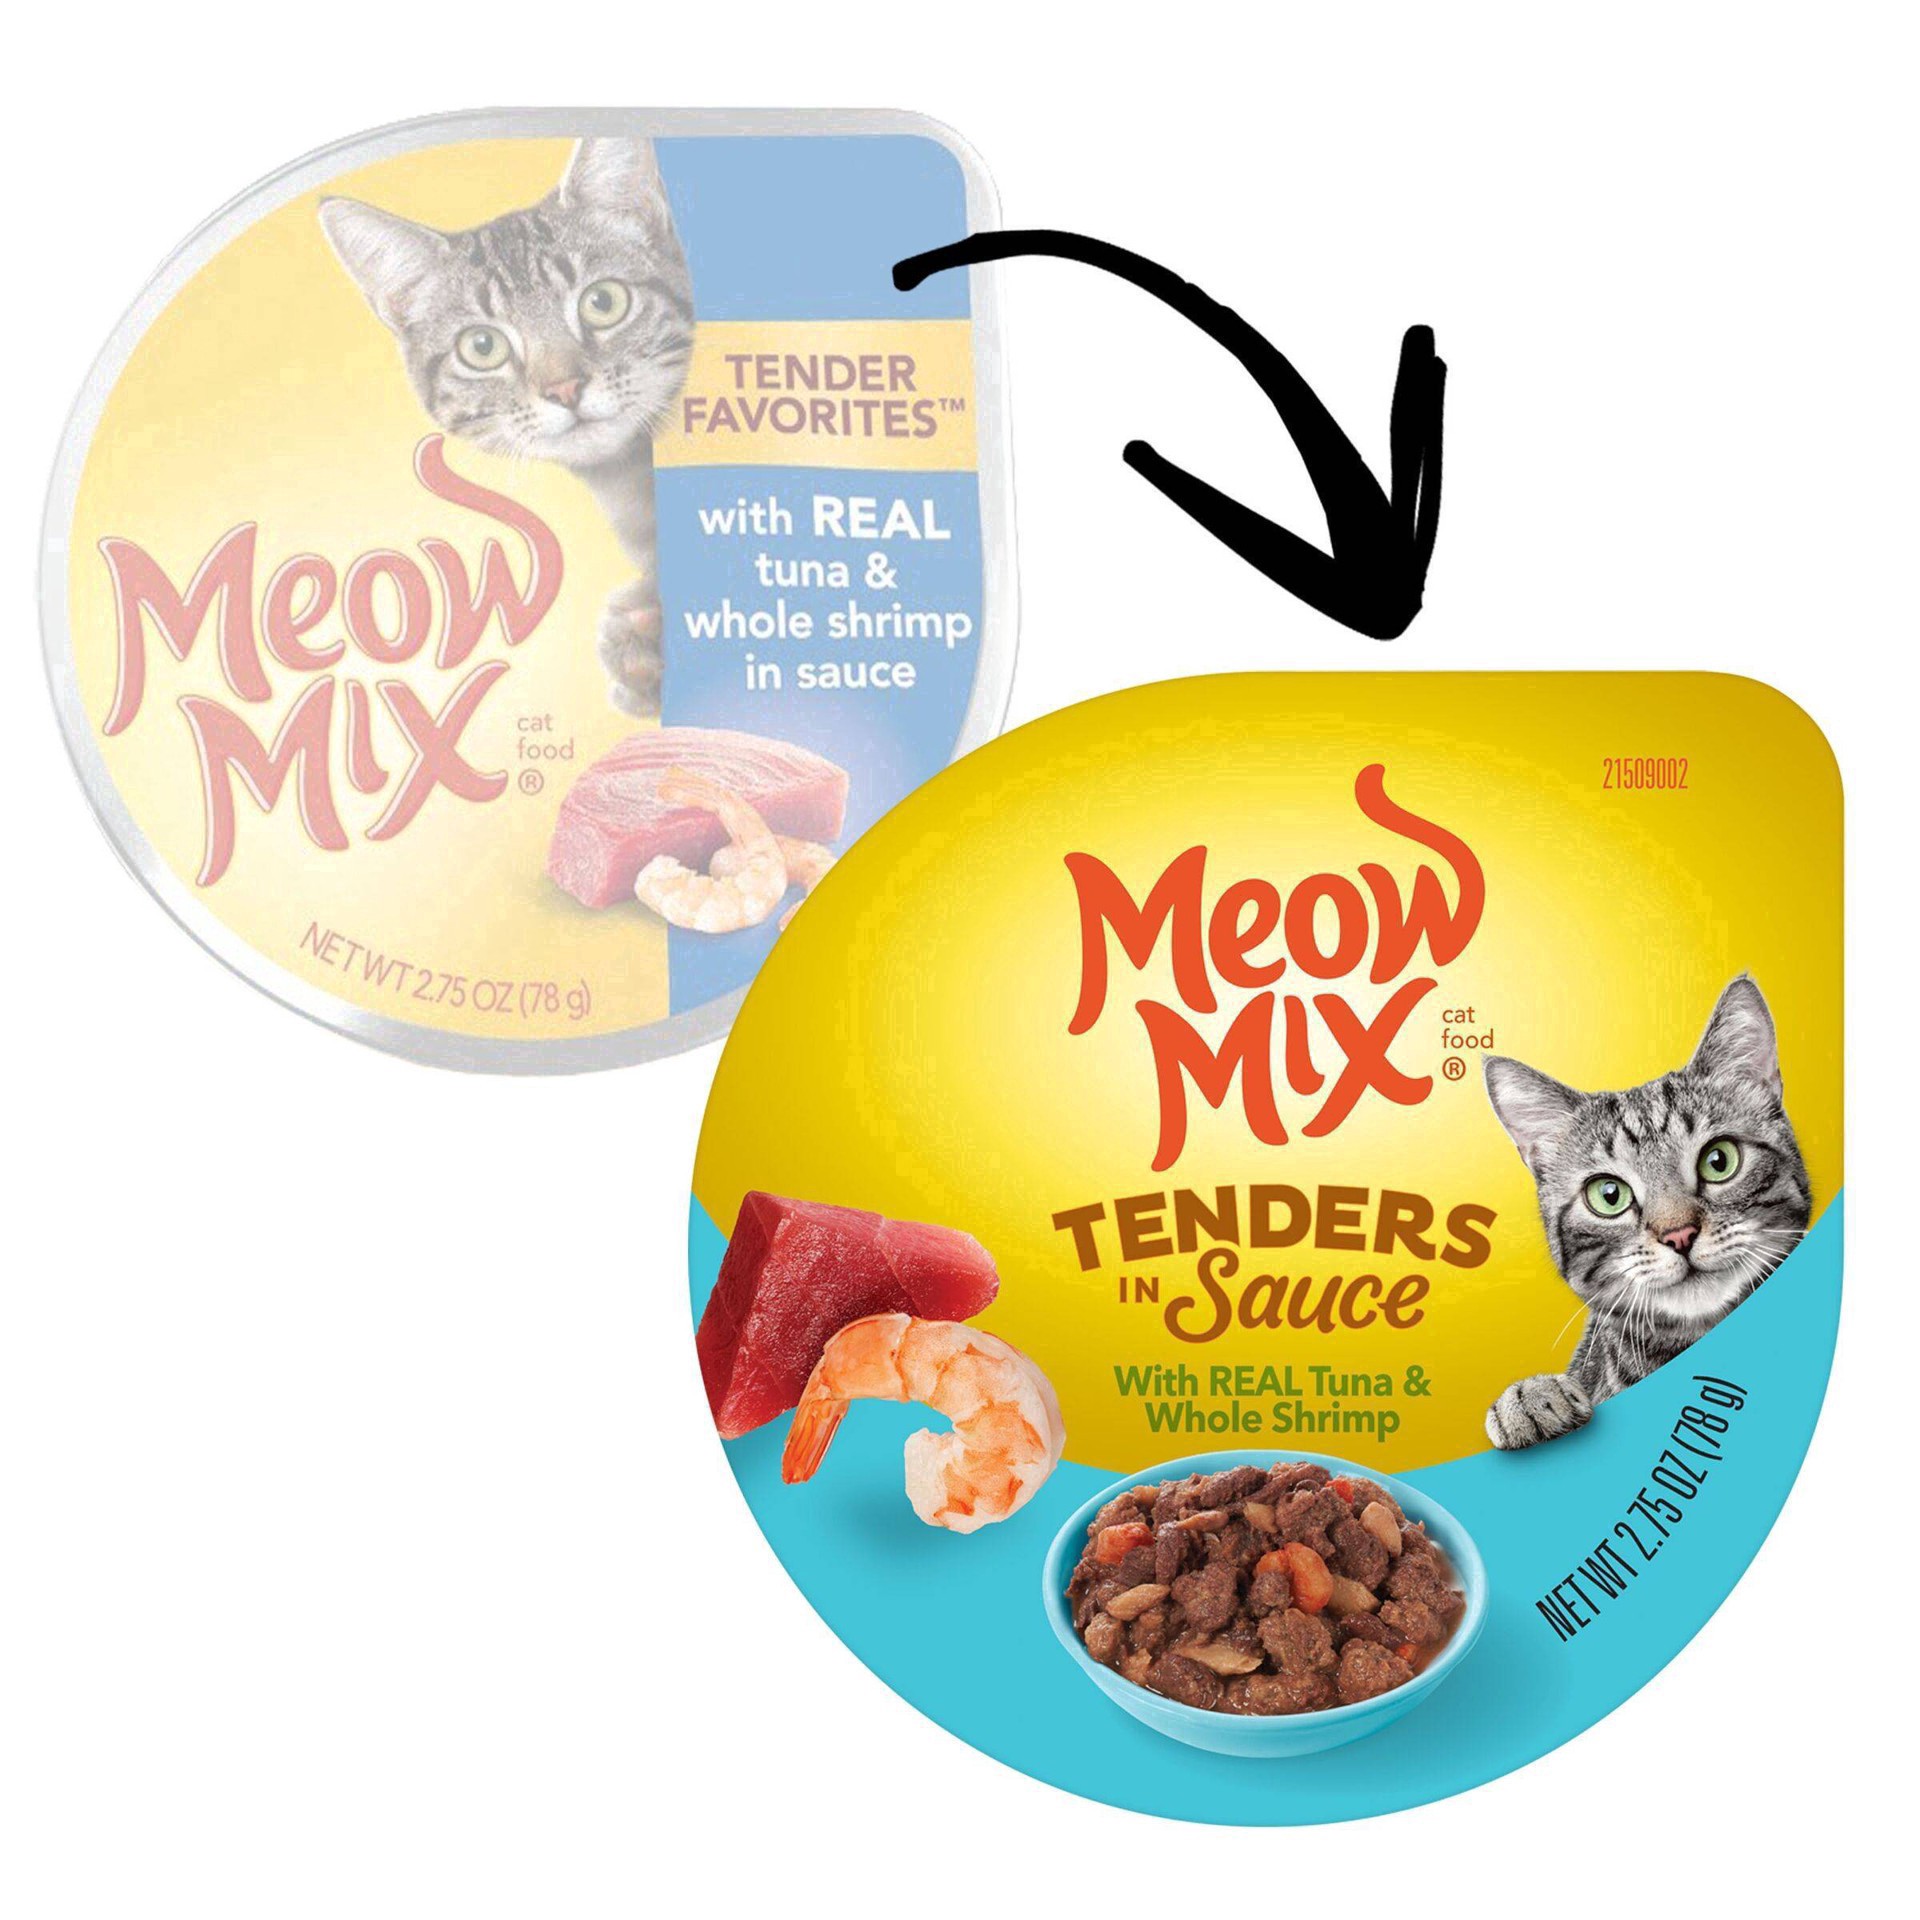 slide 14 of 59, Meow Mix Tenders in Sauce Wet Cat Food With REAL Tuna & Whole Shrimp, 2.75 Oz. Cup (Packaging And Formulation Updates Underway), 2.7 oz